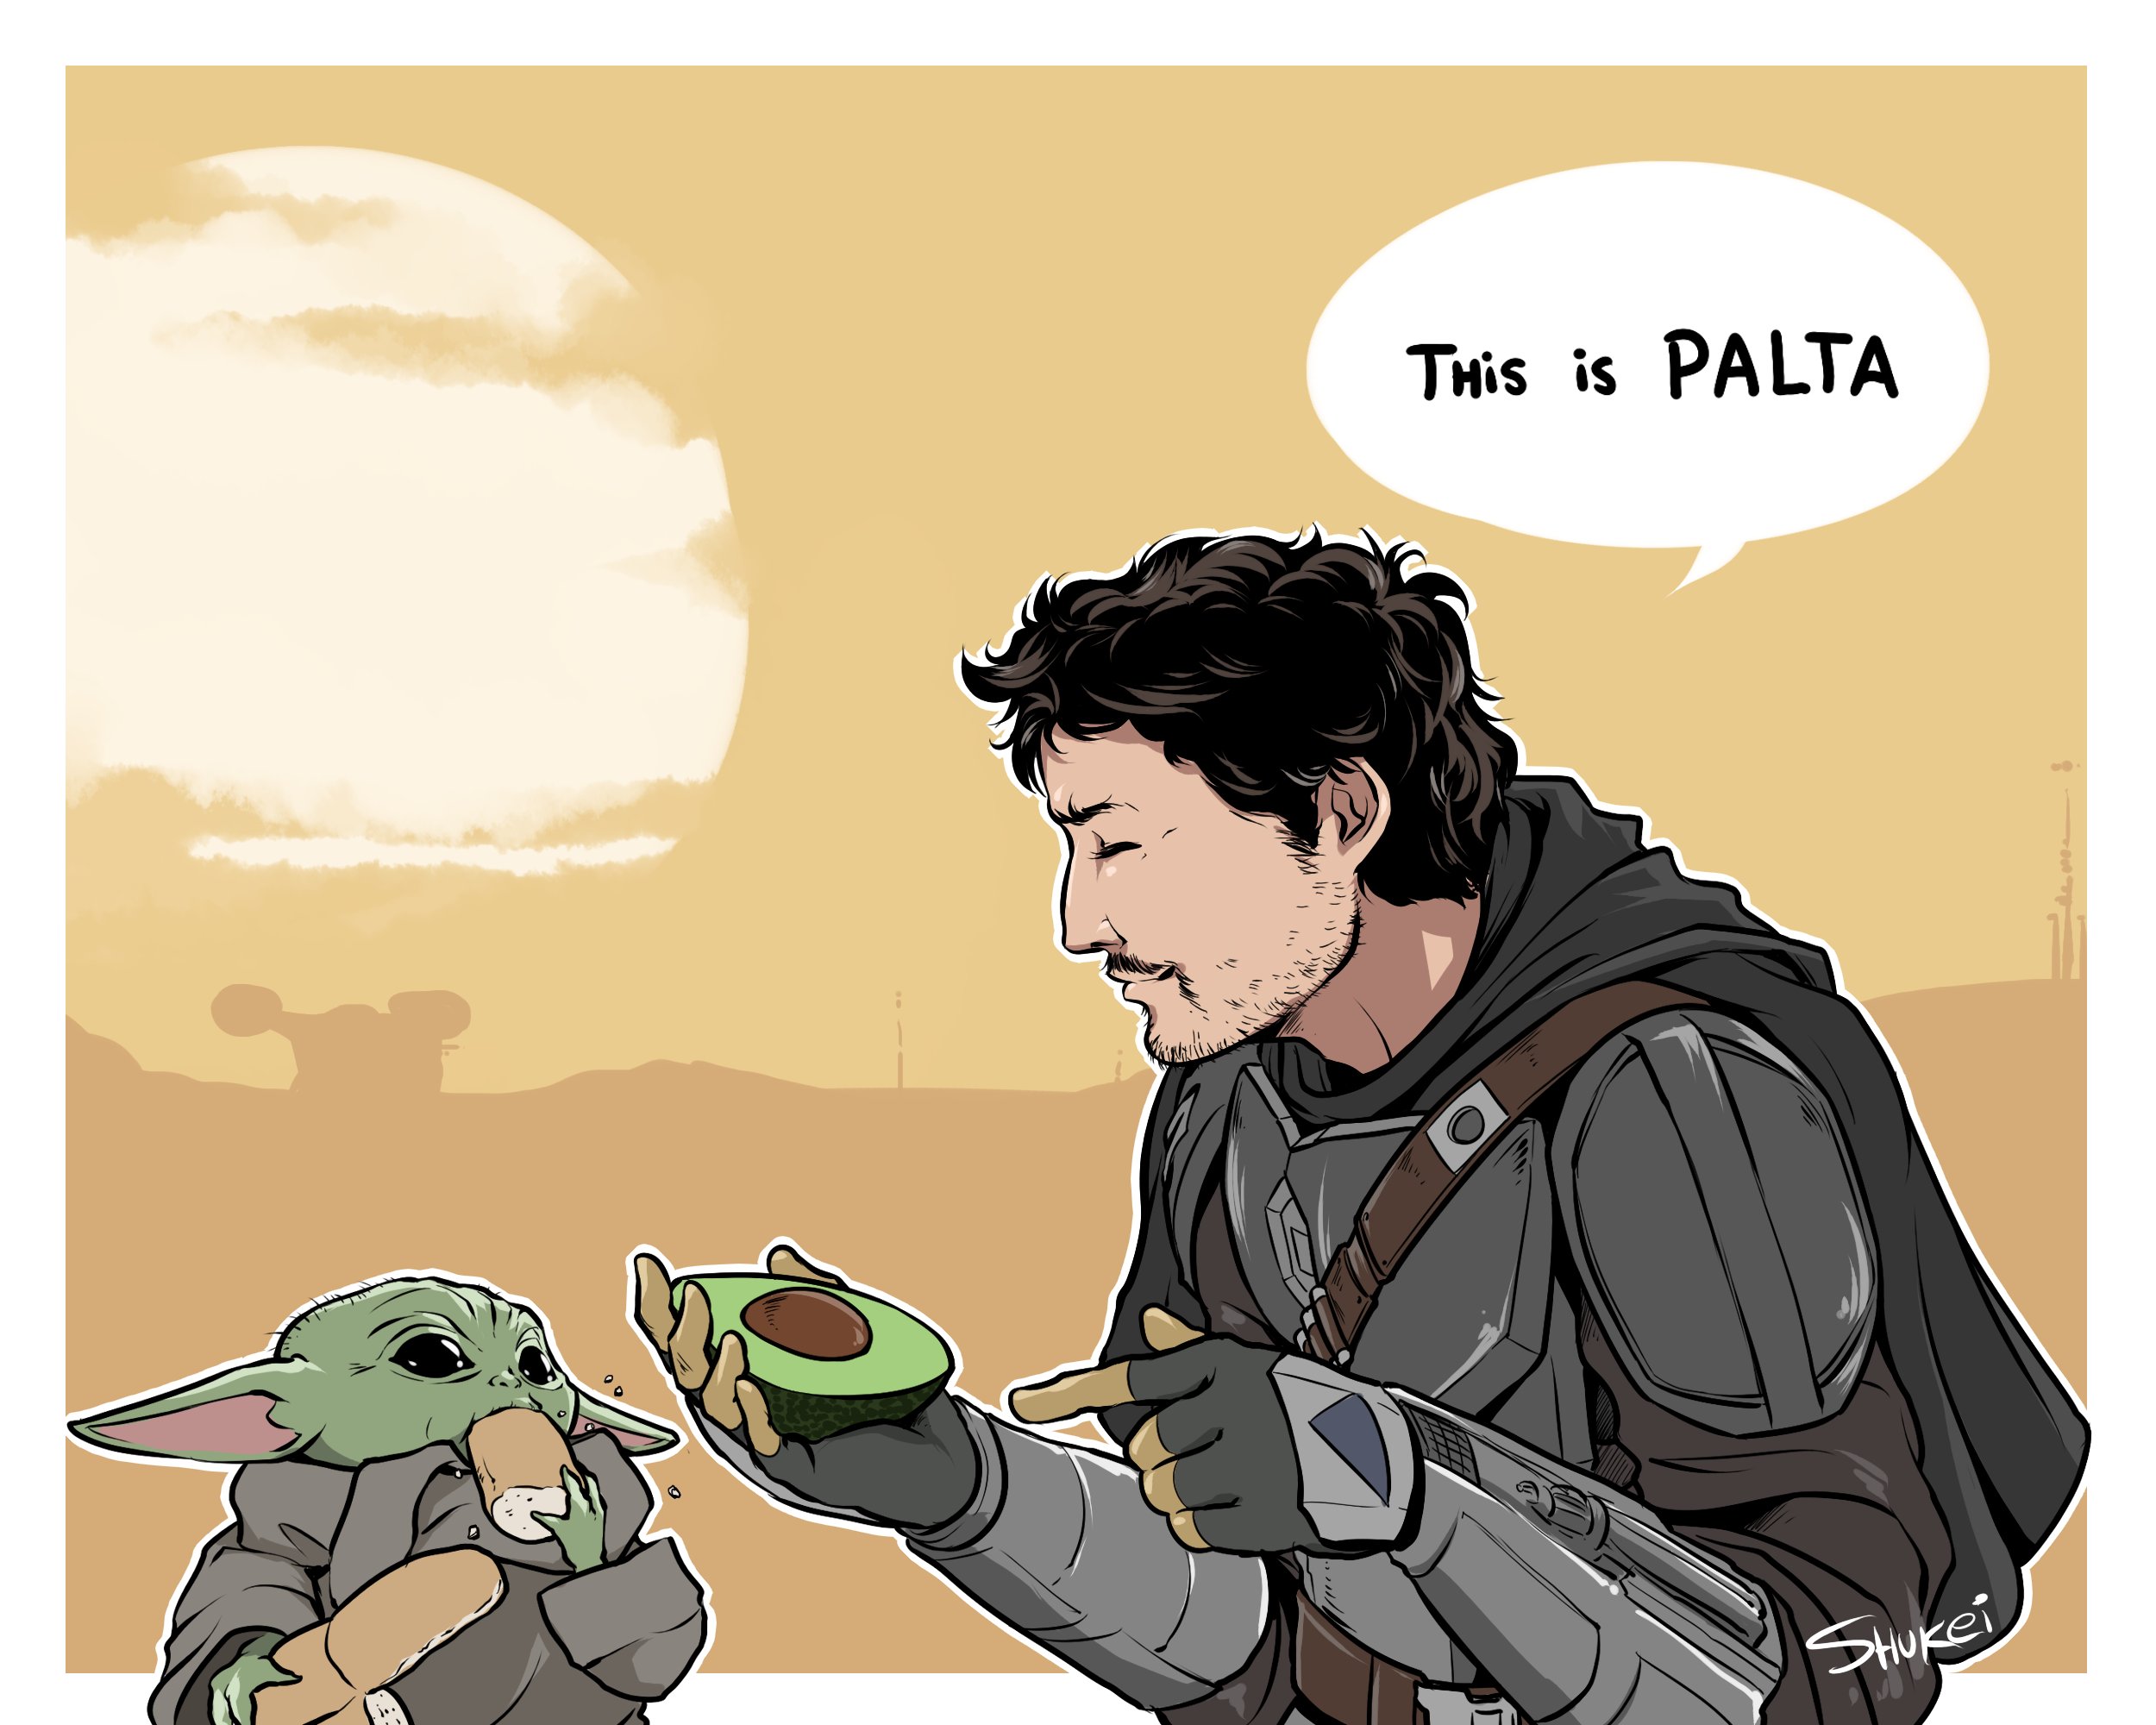 "Writing diverse Latin American characters". A fanart of Pedro Pascal as the Mandalorian by ShukeiArt (Twitter). Grogu eats a marraqueta, a Chilean type of bread, while Din Djarin teaches him about palta (avocado).